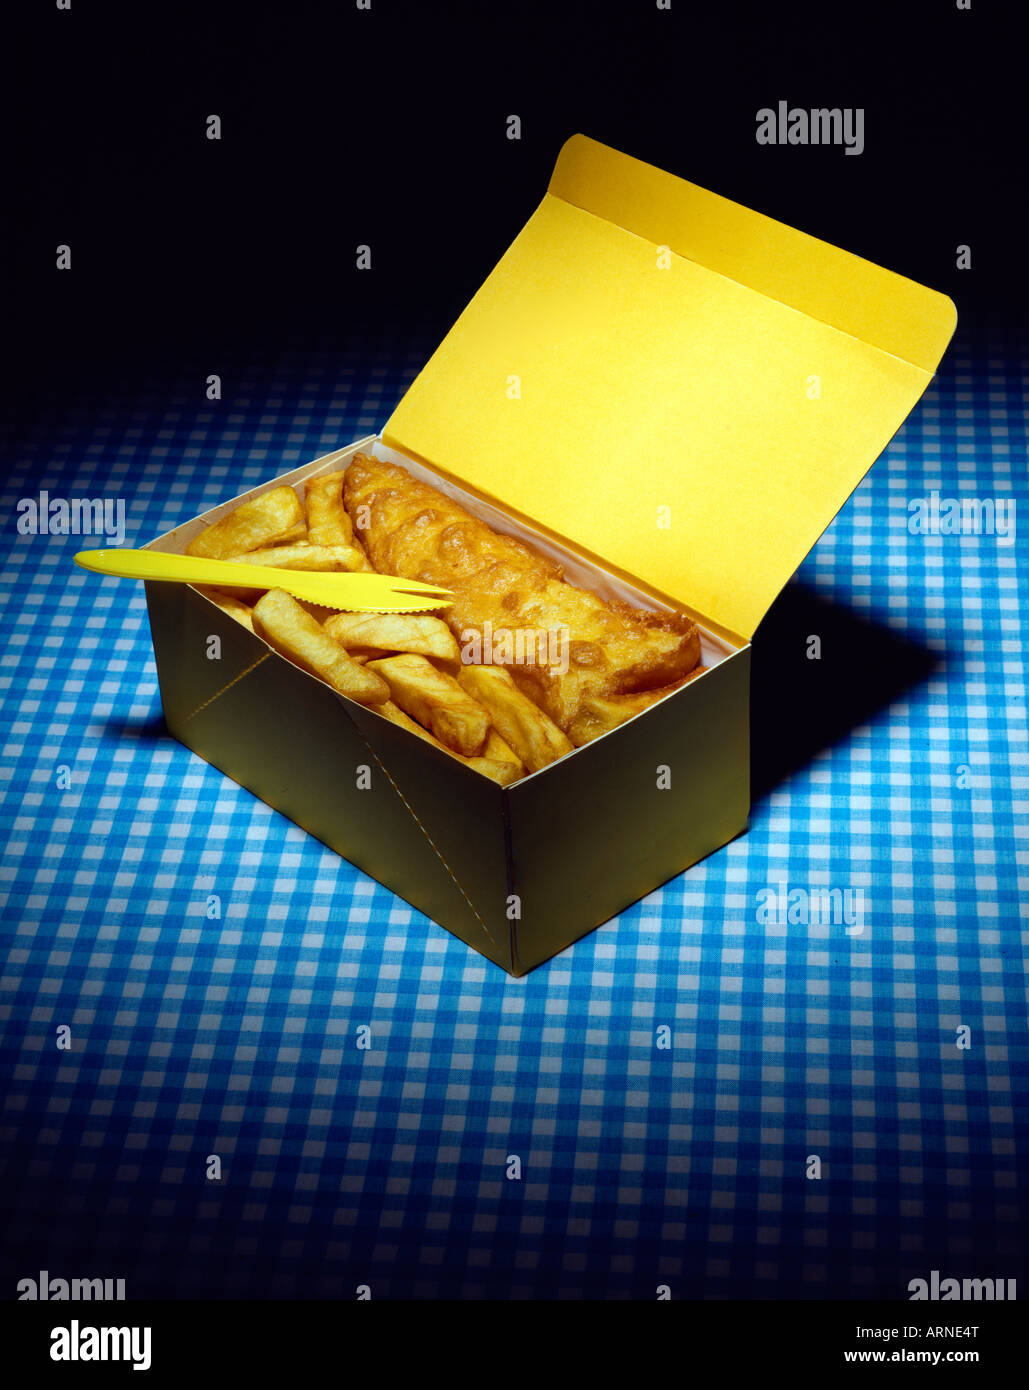 Traditional British Fish & Chips spotlit, presented in a cardboard take out box with a plastic fork on a blue gingham tablecloth Stock Photo